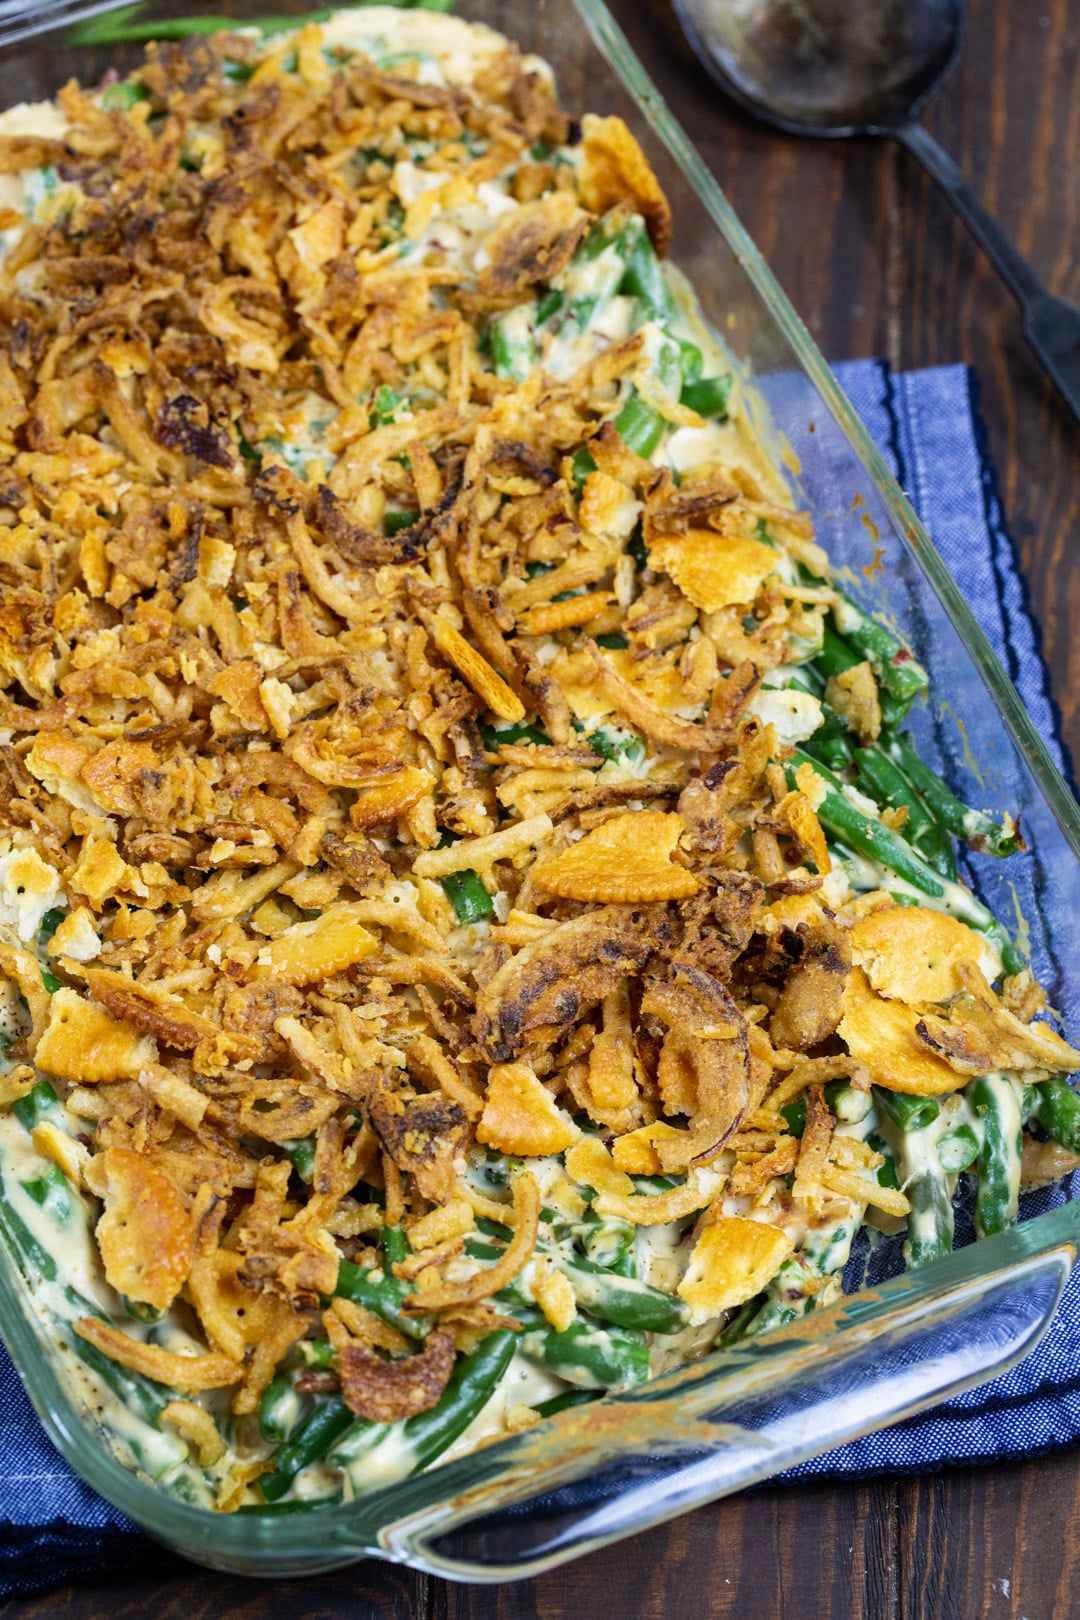 Cream Cheese Green Bean Casserole topped with French-fried onions and Ritz Cracker crumbs.